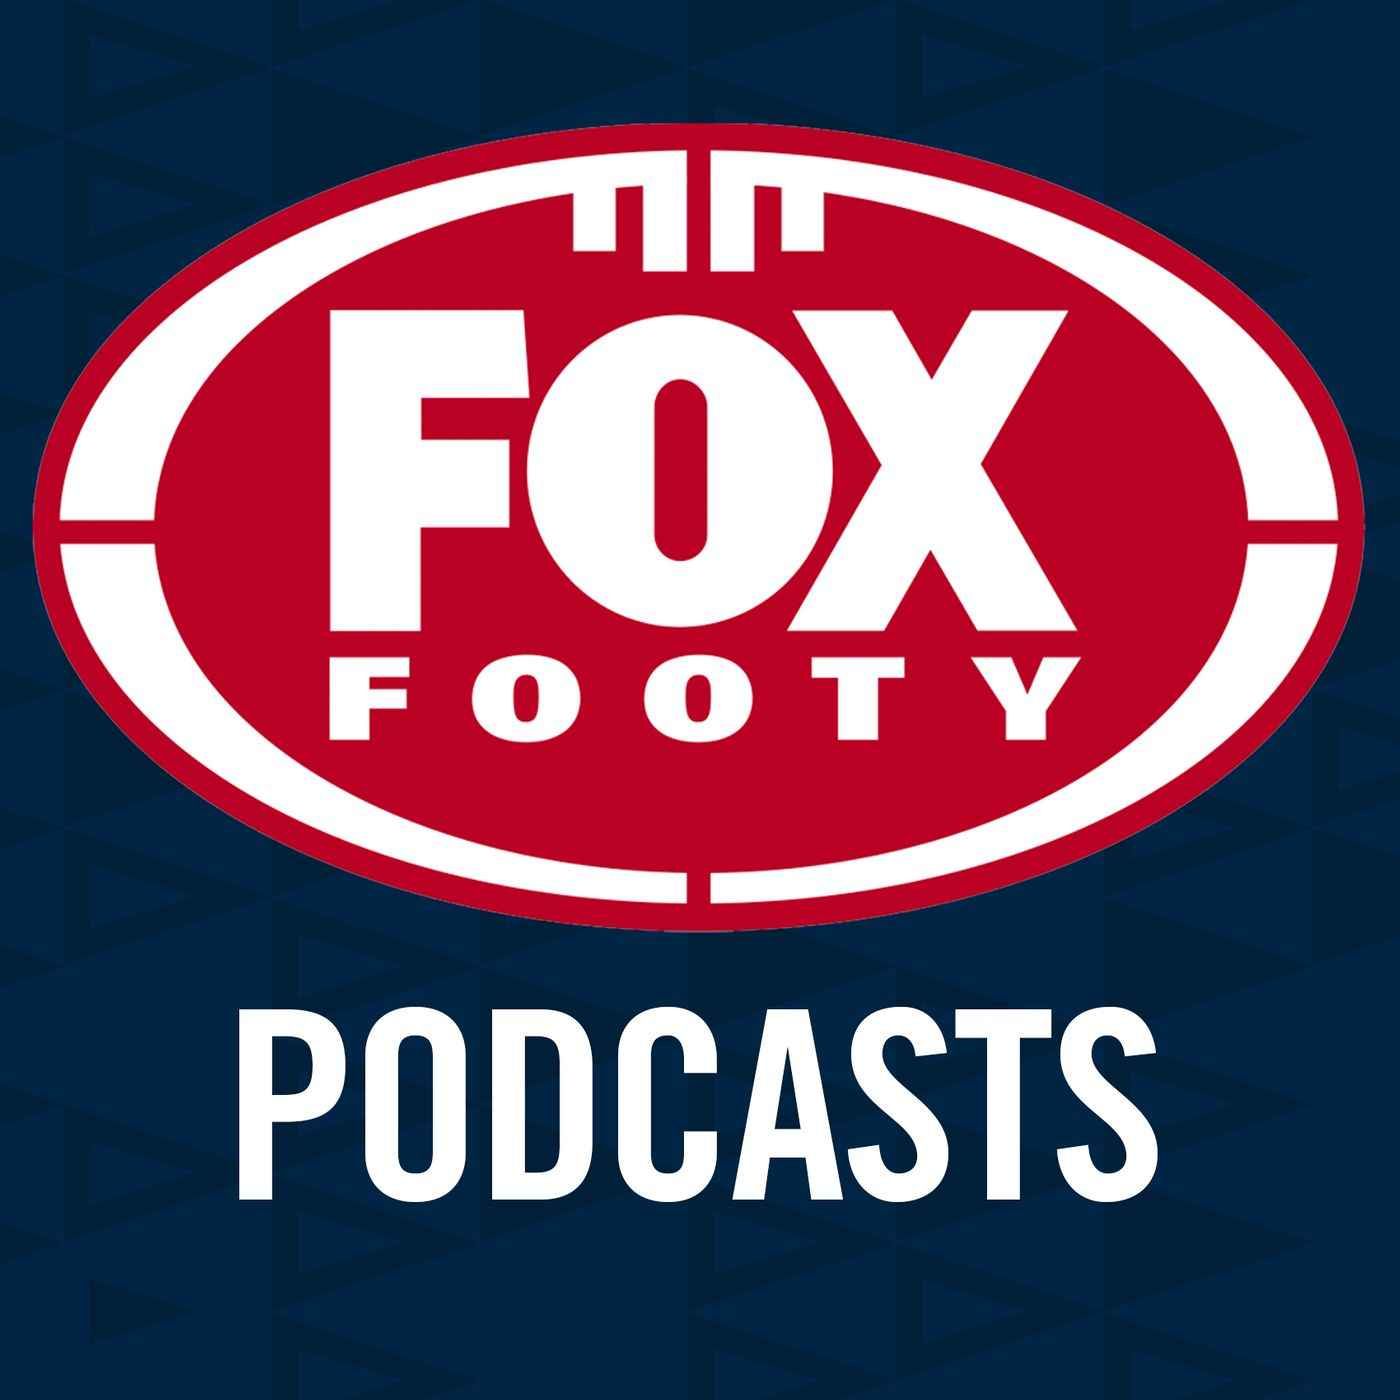 Fox Footy Podcast: Run Home analysis - who'll play finals?